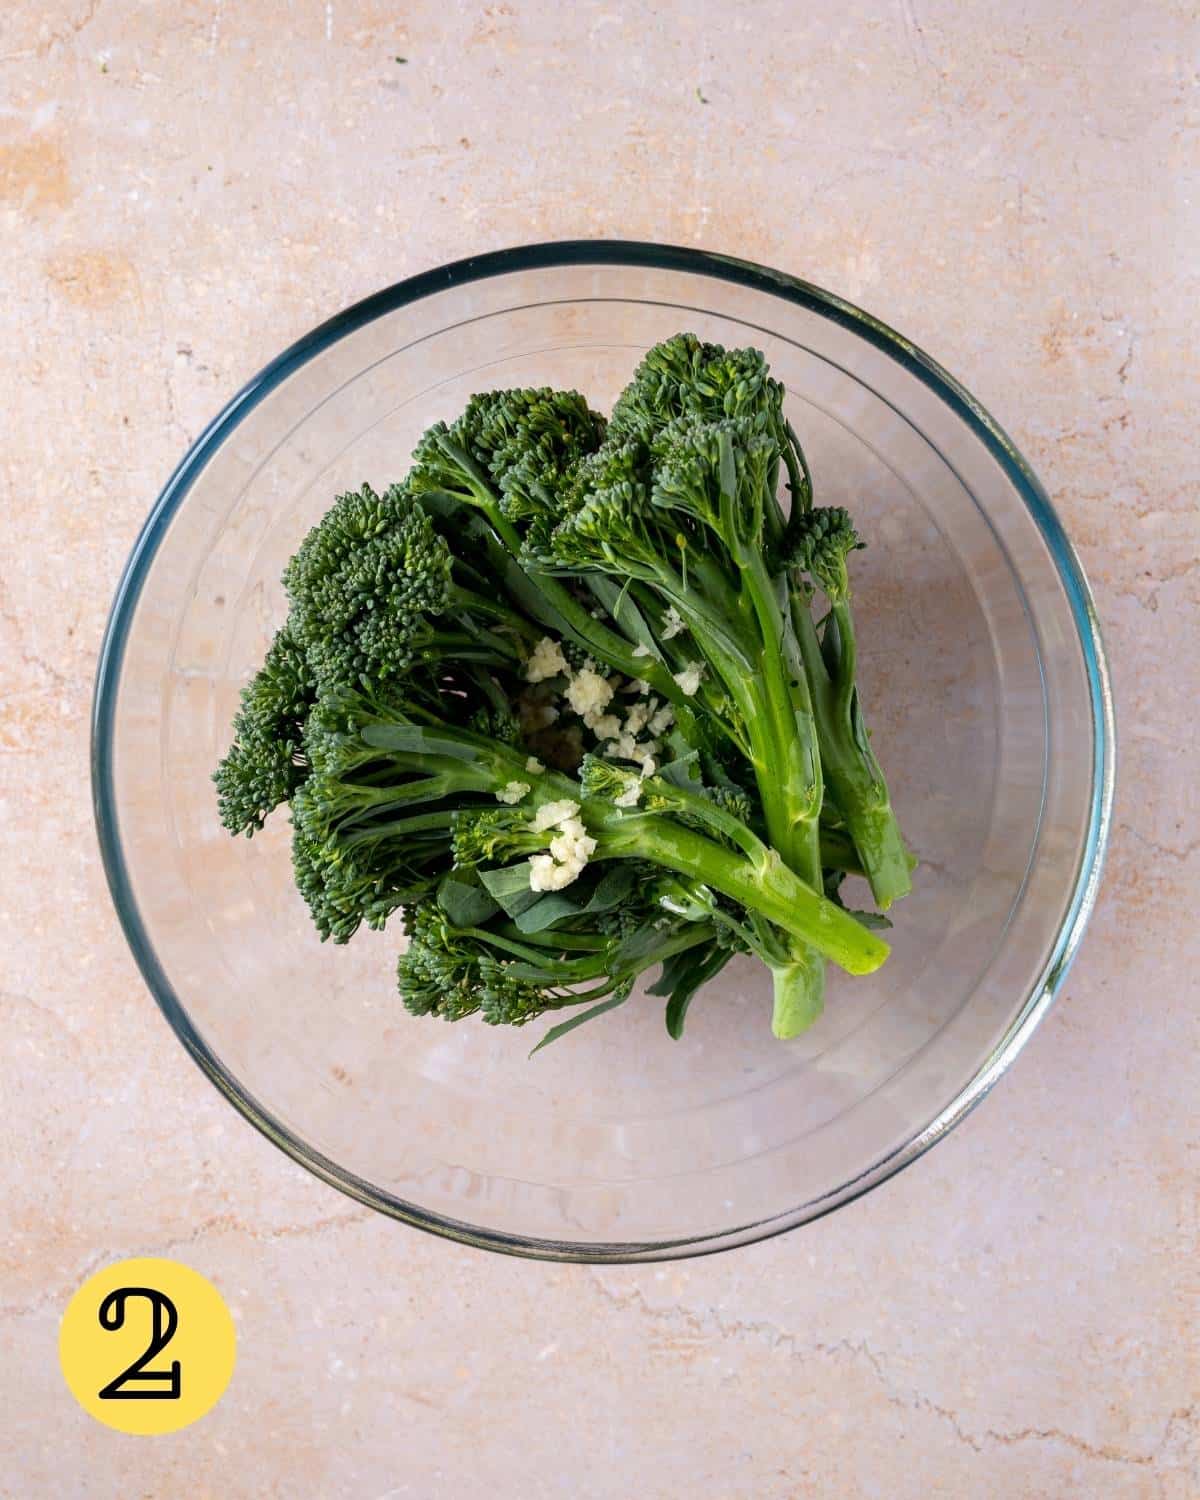 Broccoletti in a glass bowl with olive oil, garlic and salt.